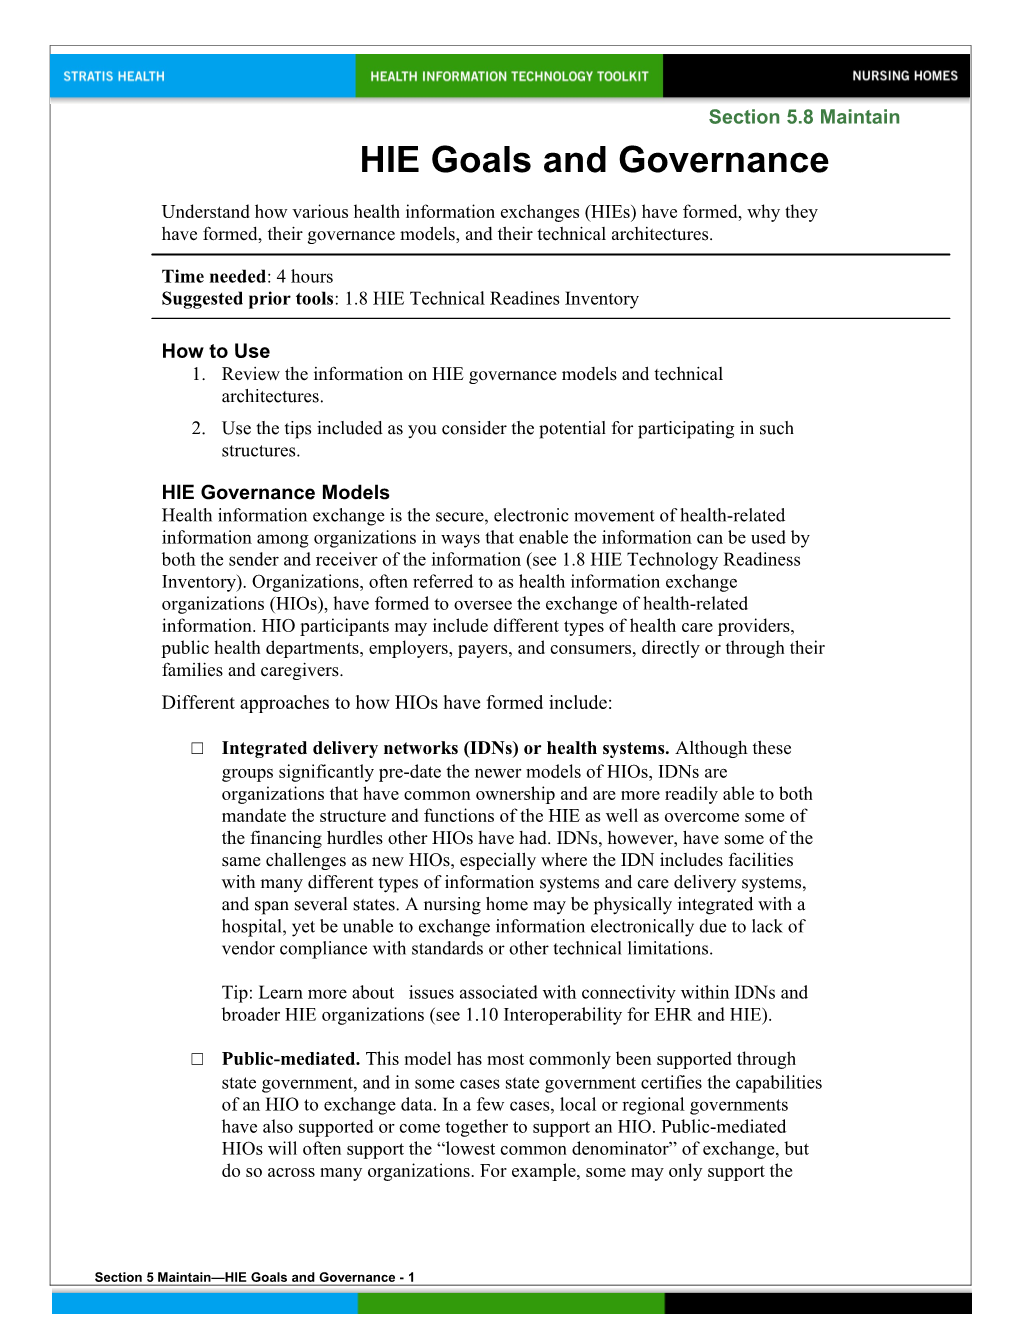 5 HIE Goals and Governance